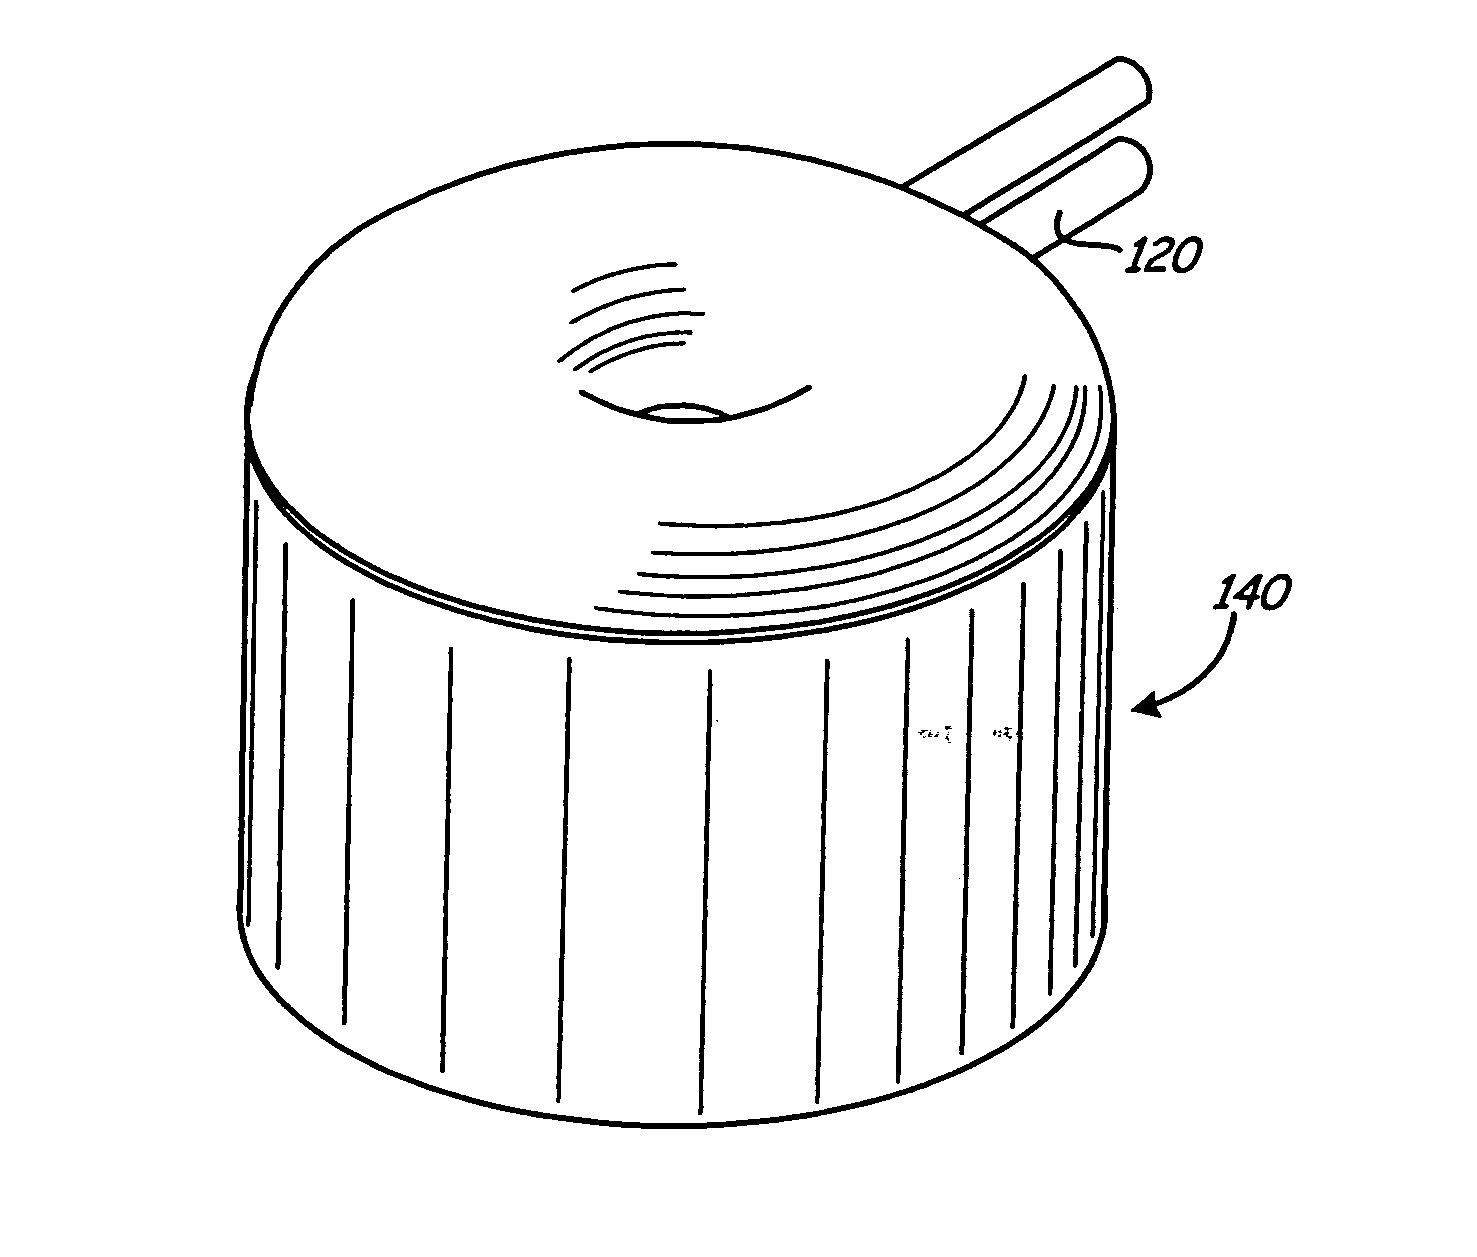 Light-weight, conduction-cooled inductor